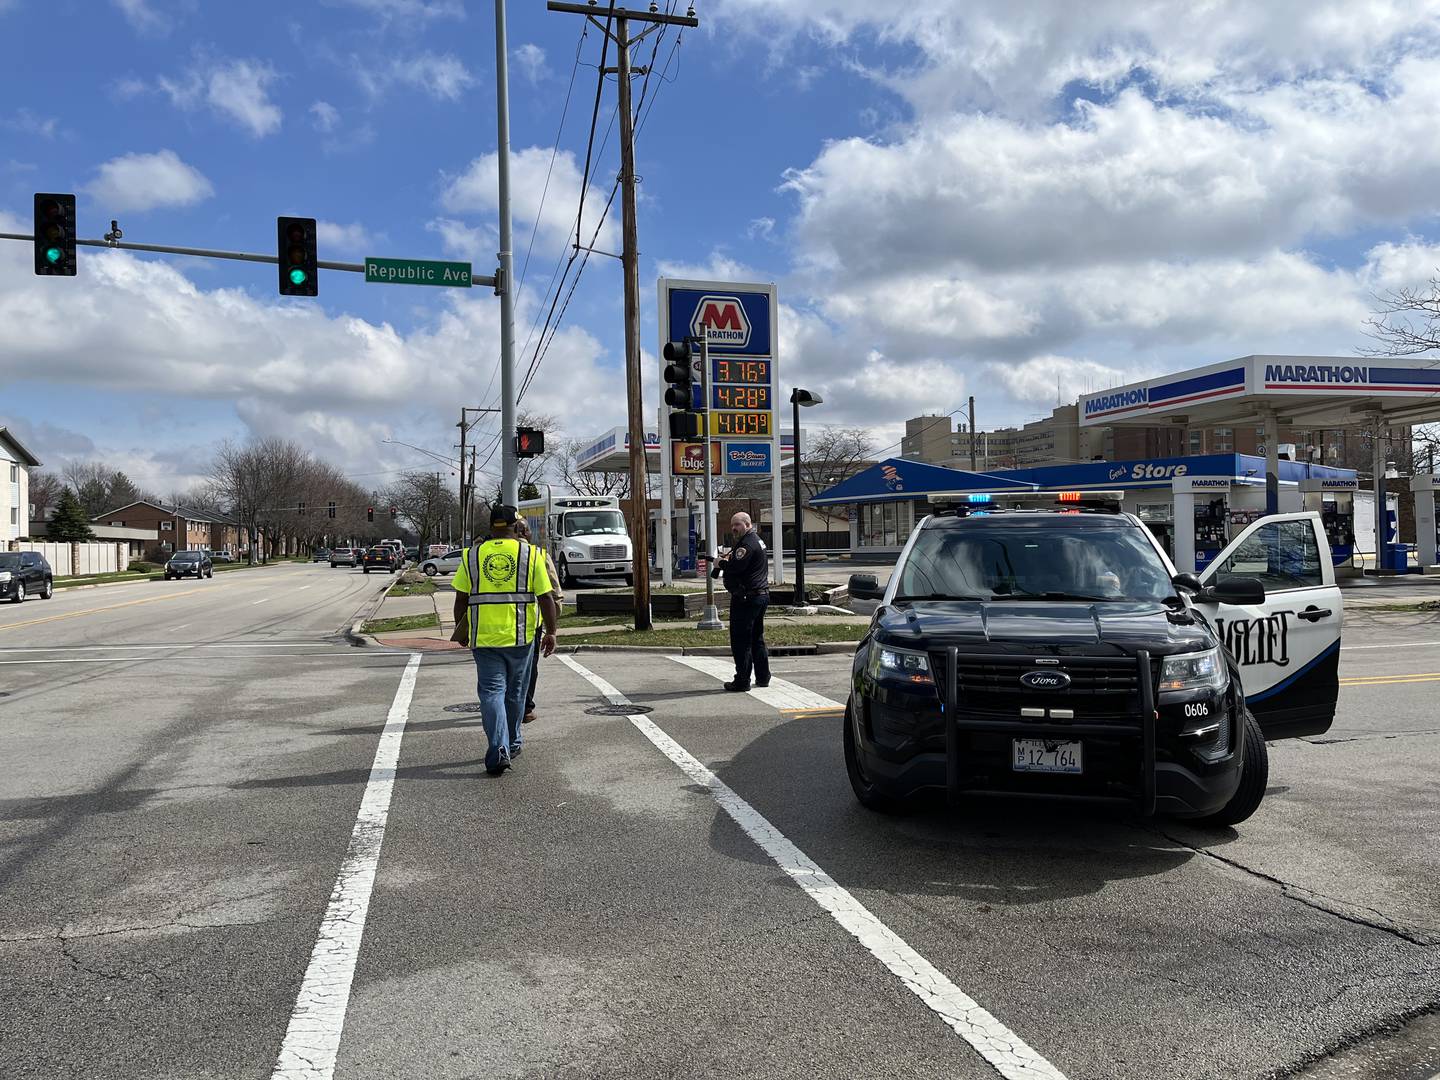 Members of the Joliet Township's violence prevention program Peace Over Violence cross the street as Joliet police officers investigate a shooting on Thursday, March 14, on Republic Avenue in Joliet.